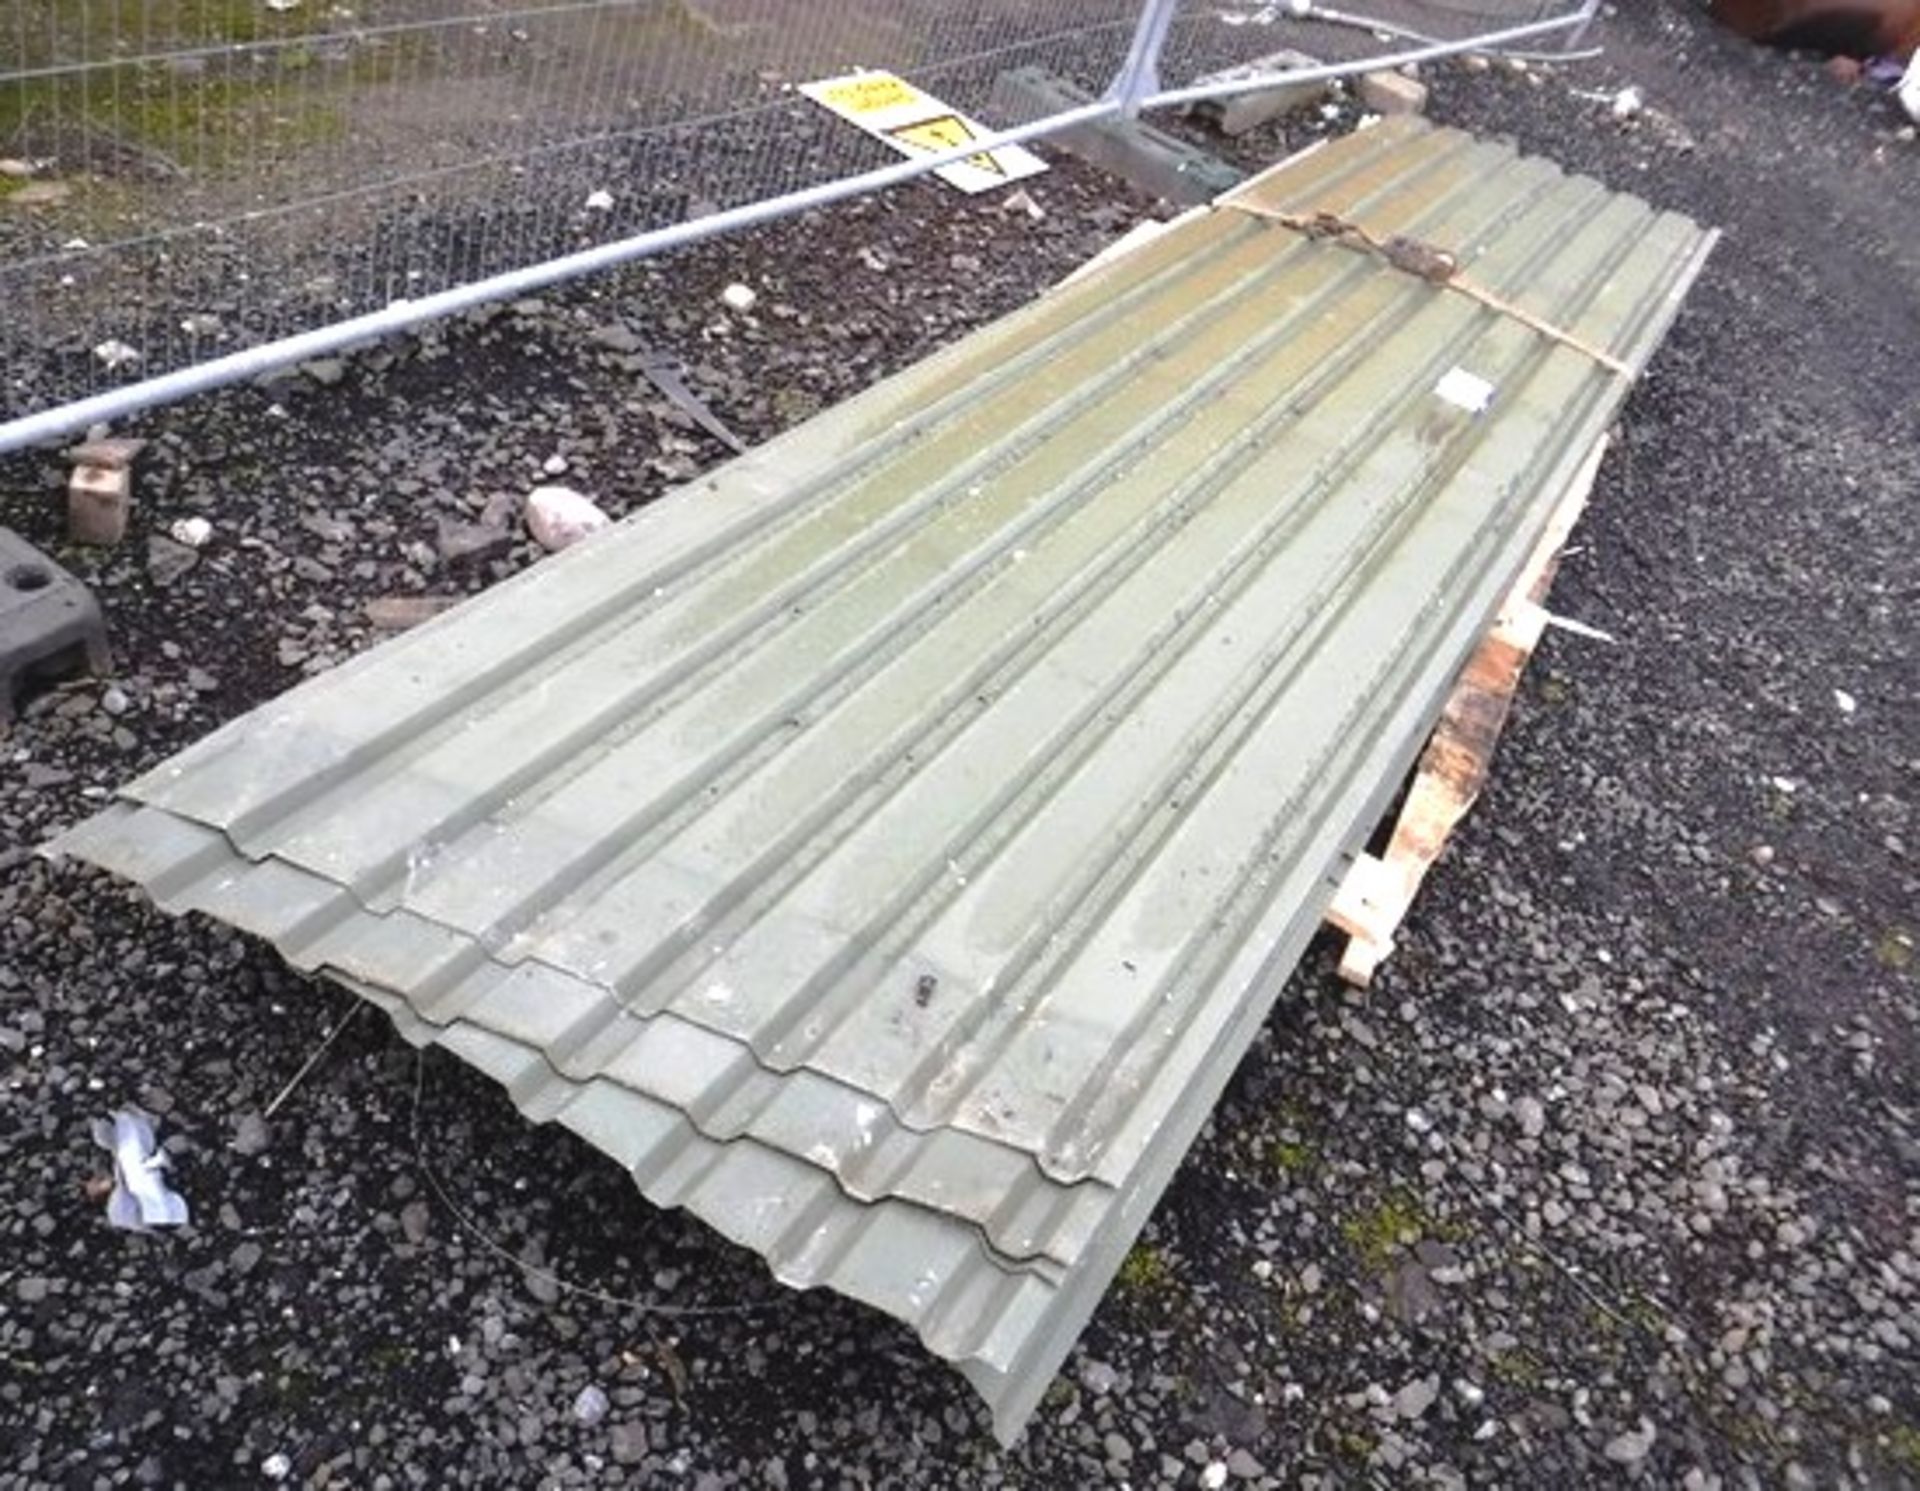 SELECTION OF STEEL CLADDING FOR SHEDS/BUILDINGS. APPROX 50 SHEETS 15' X 3' 7" - Image 2 of 4